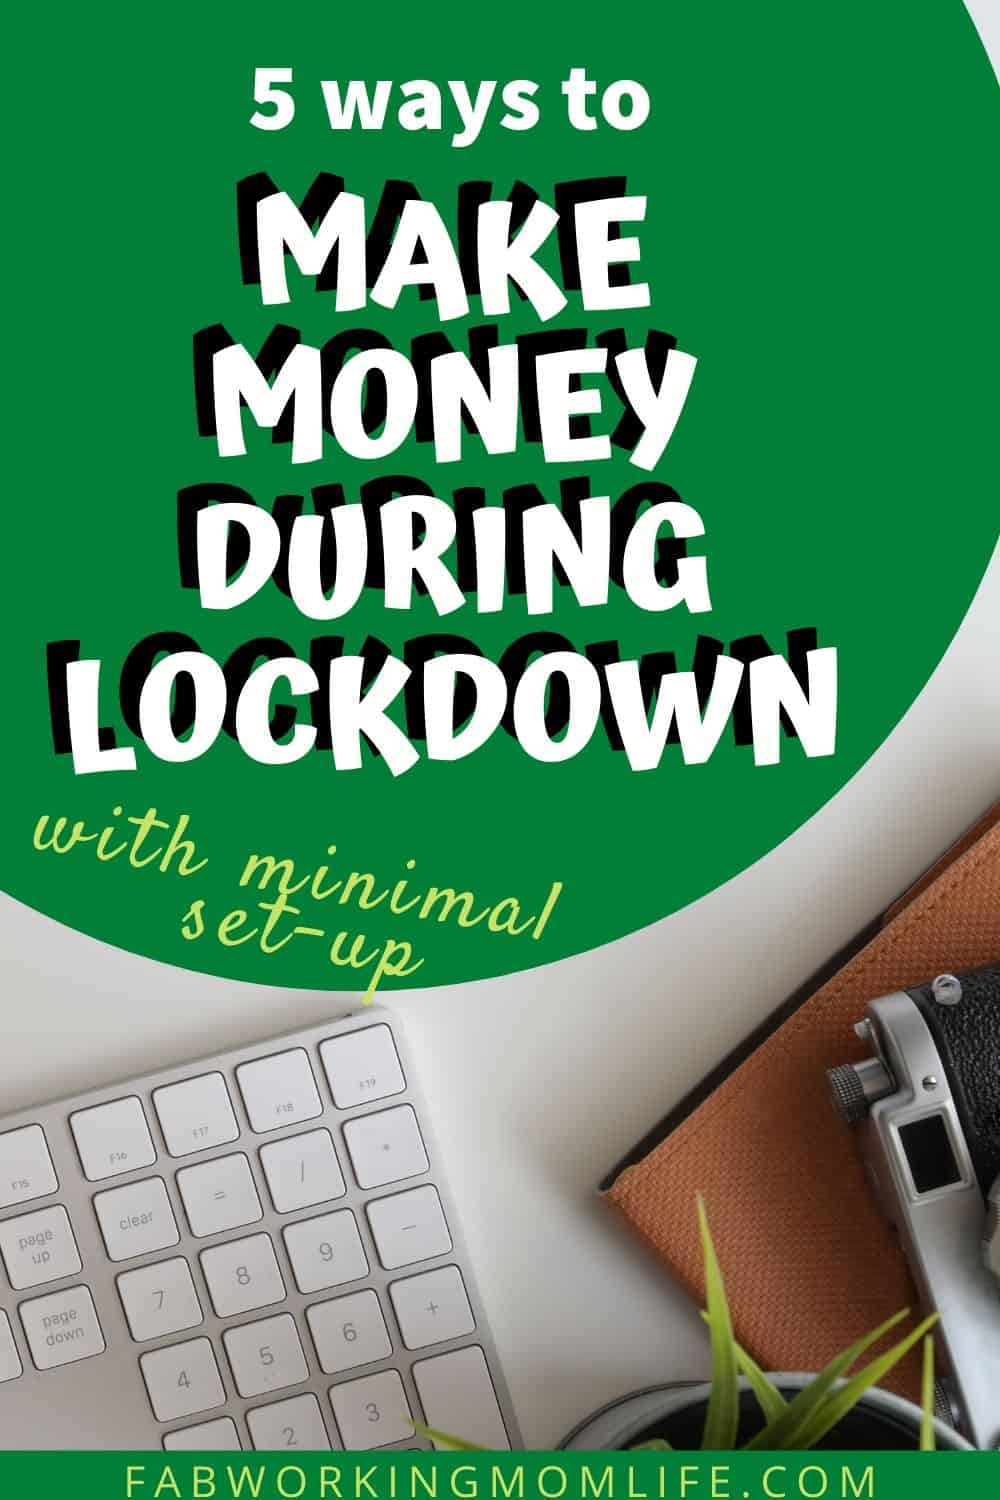 5 Cost-effective ways to make money with a minimum set-up at home - Fab Working Mom Life